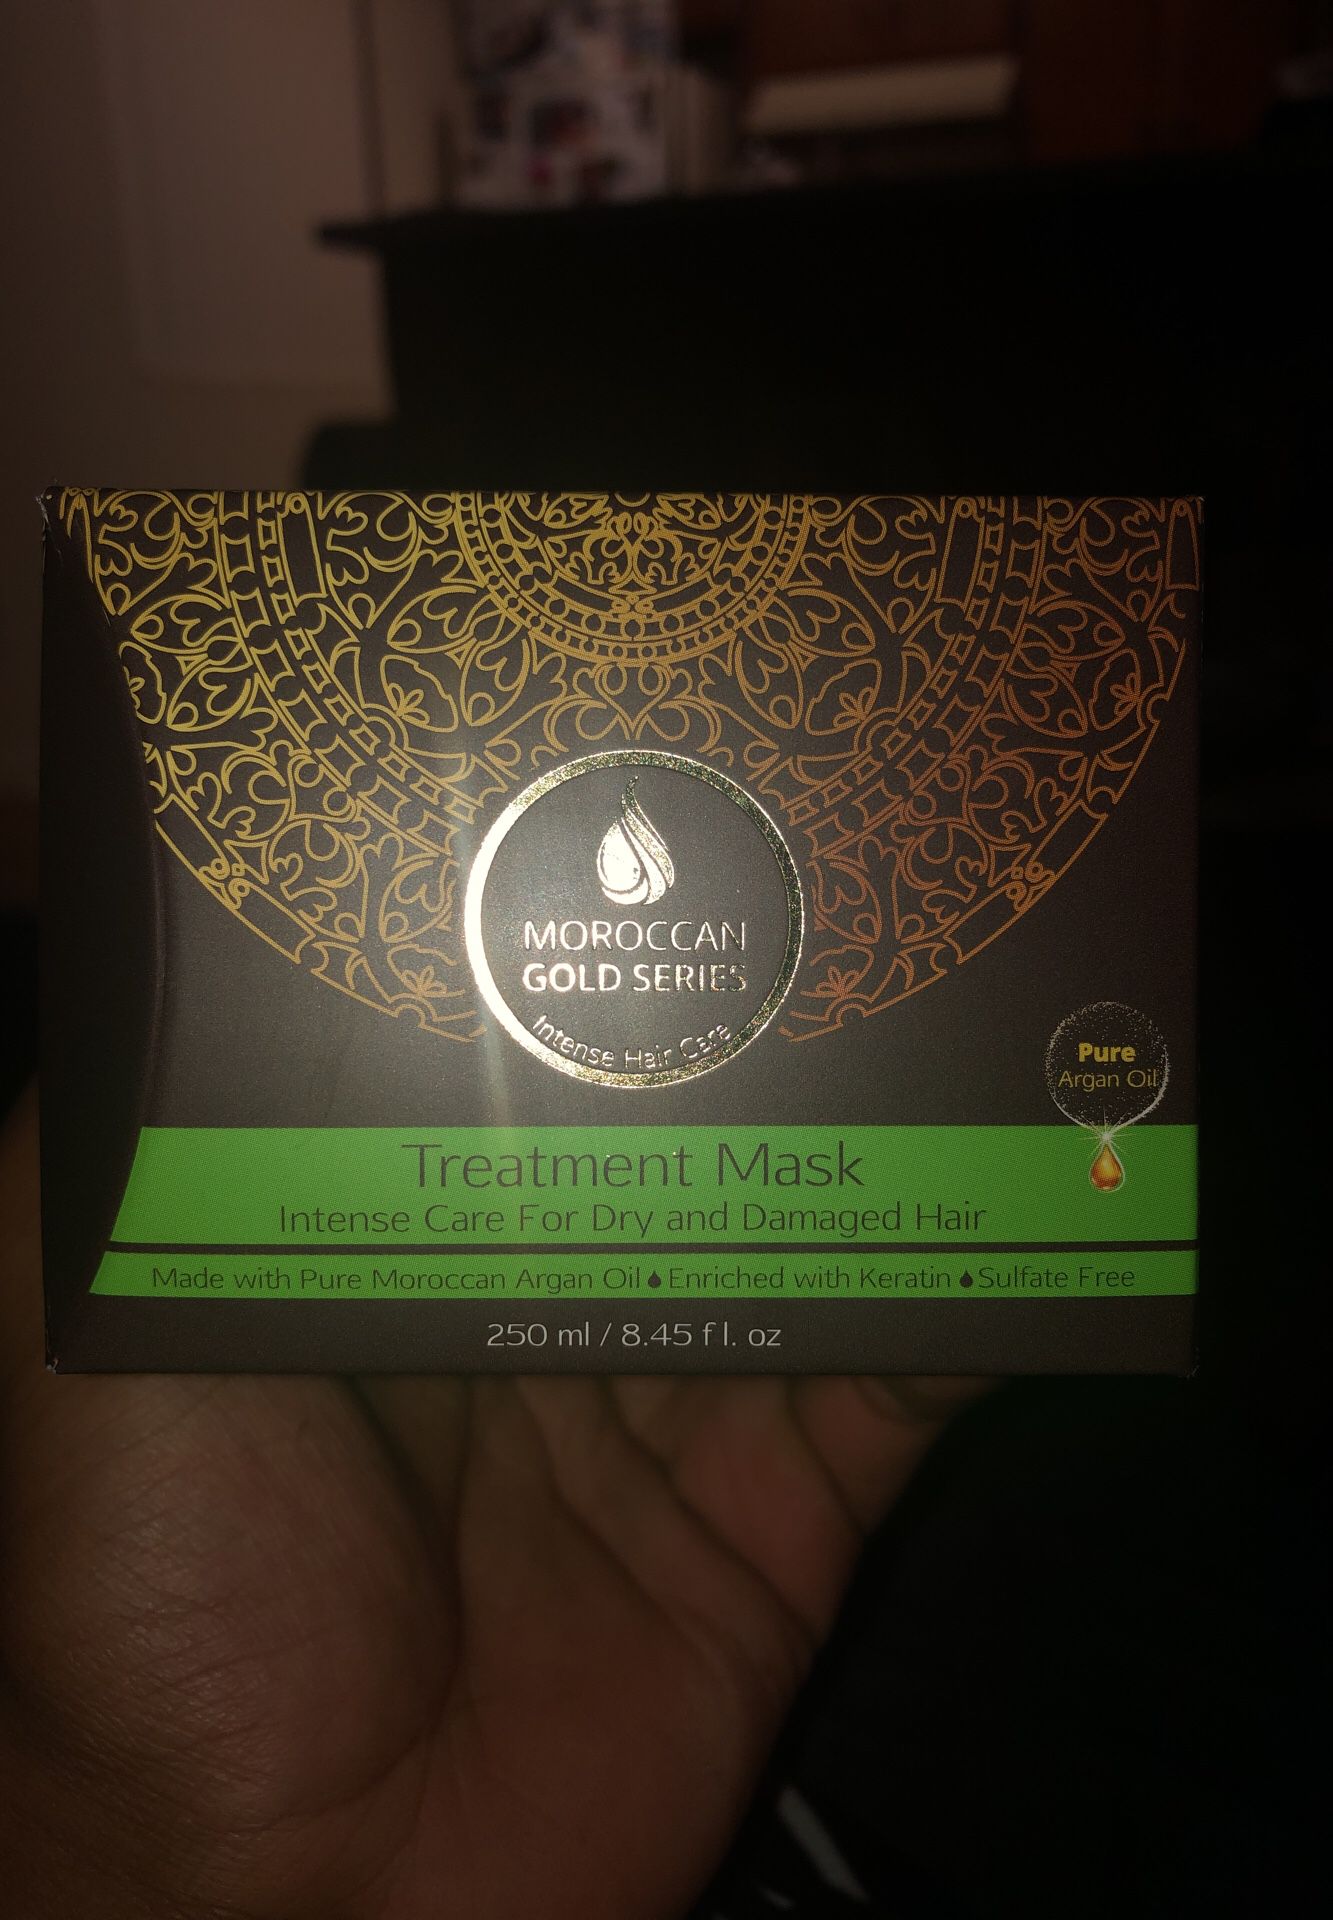 Moroccan gold series treatment mask for dry and damaged hair